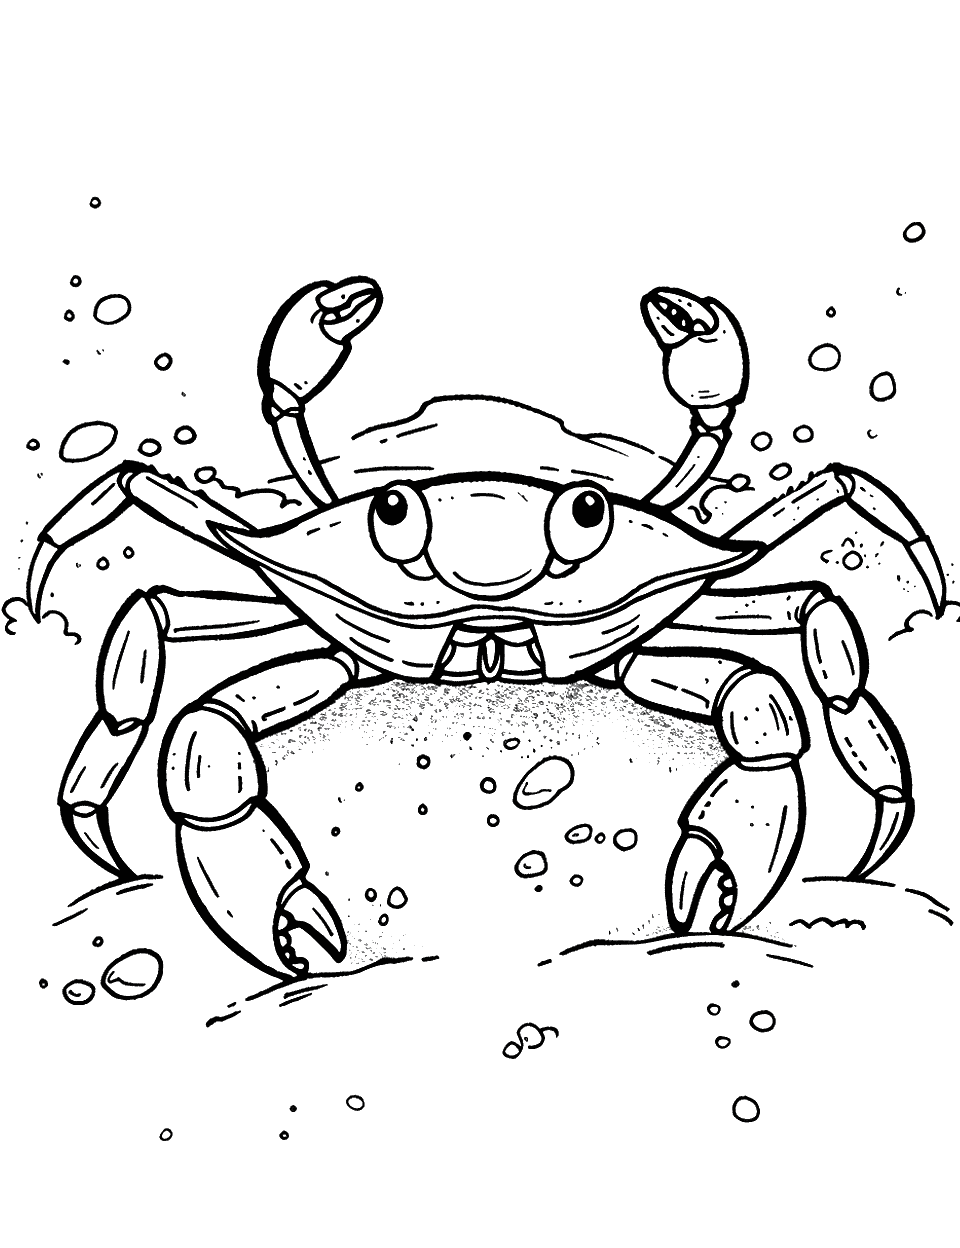 Ghost Crab Adventure Coloring Page - A ghost crab emerging from its hole in the sand, exploring the beach.